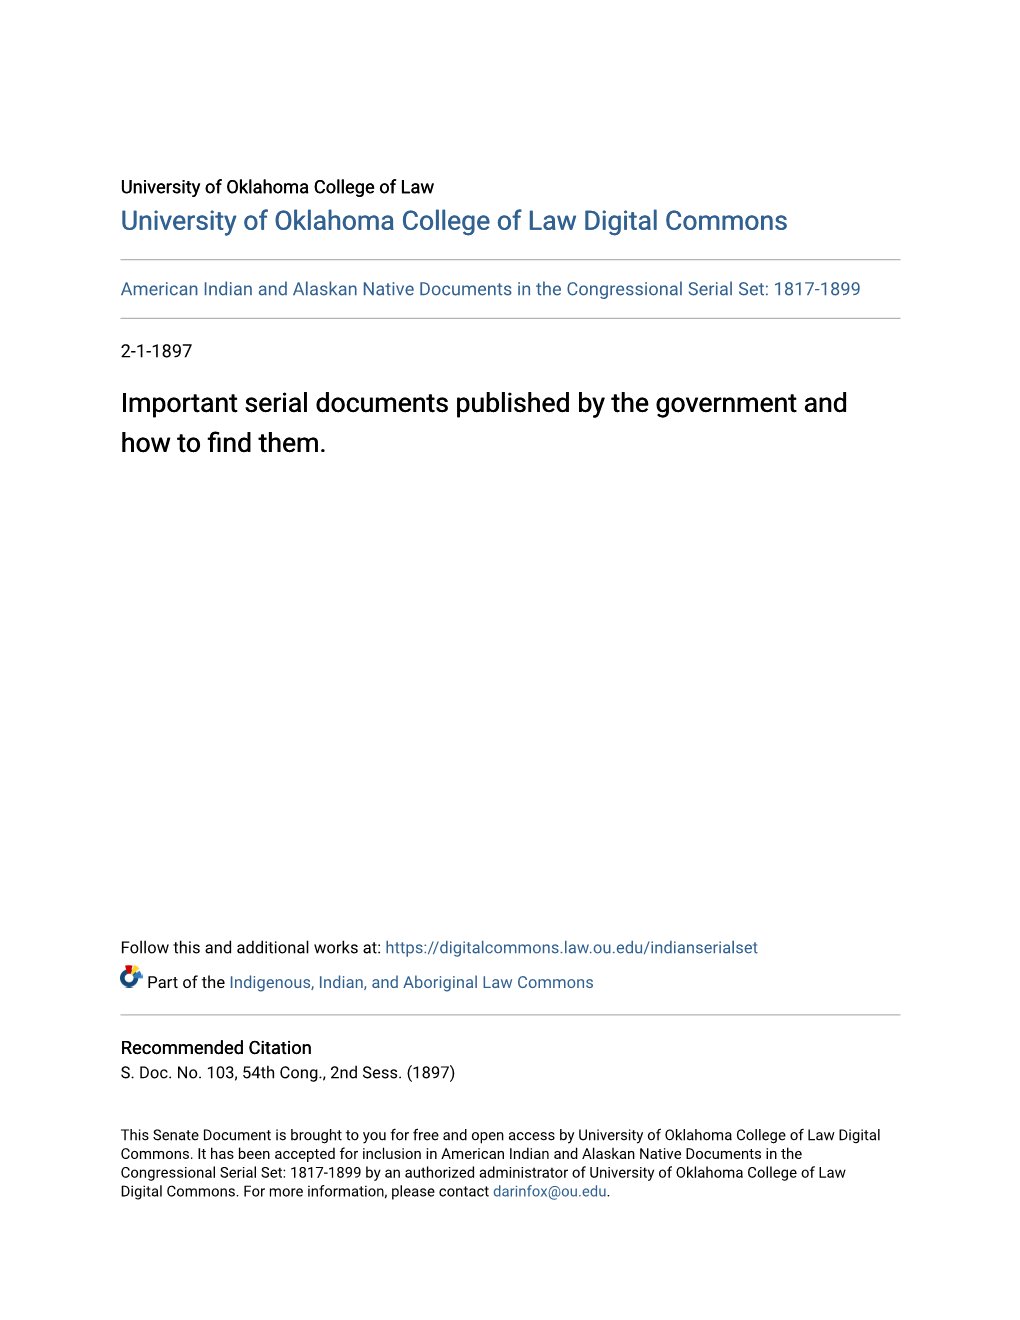 Important Serial Documents Published by the Government and How to Find Them